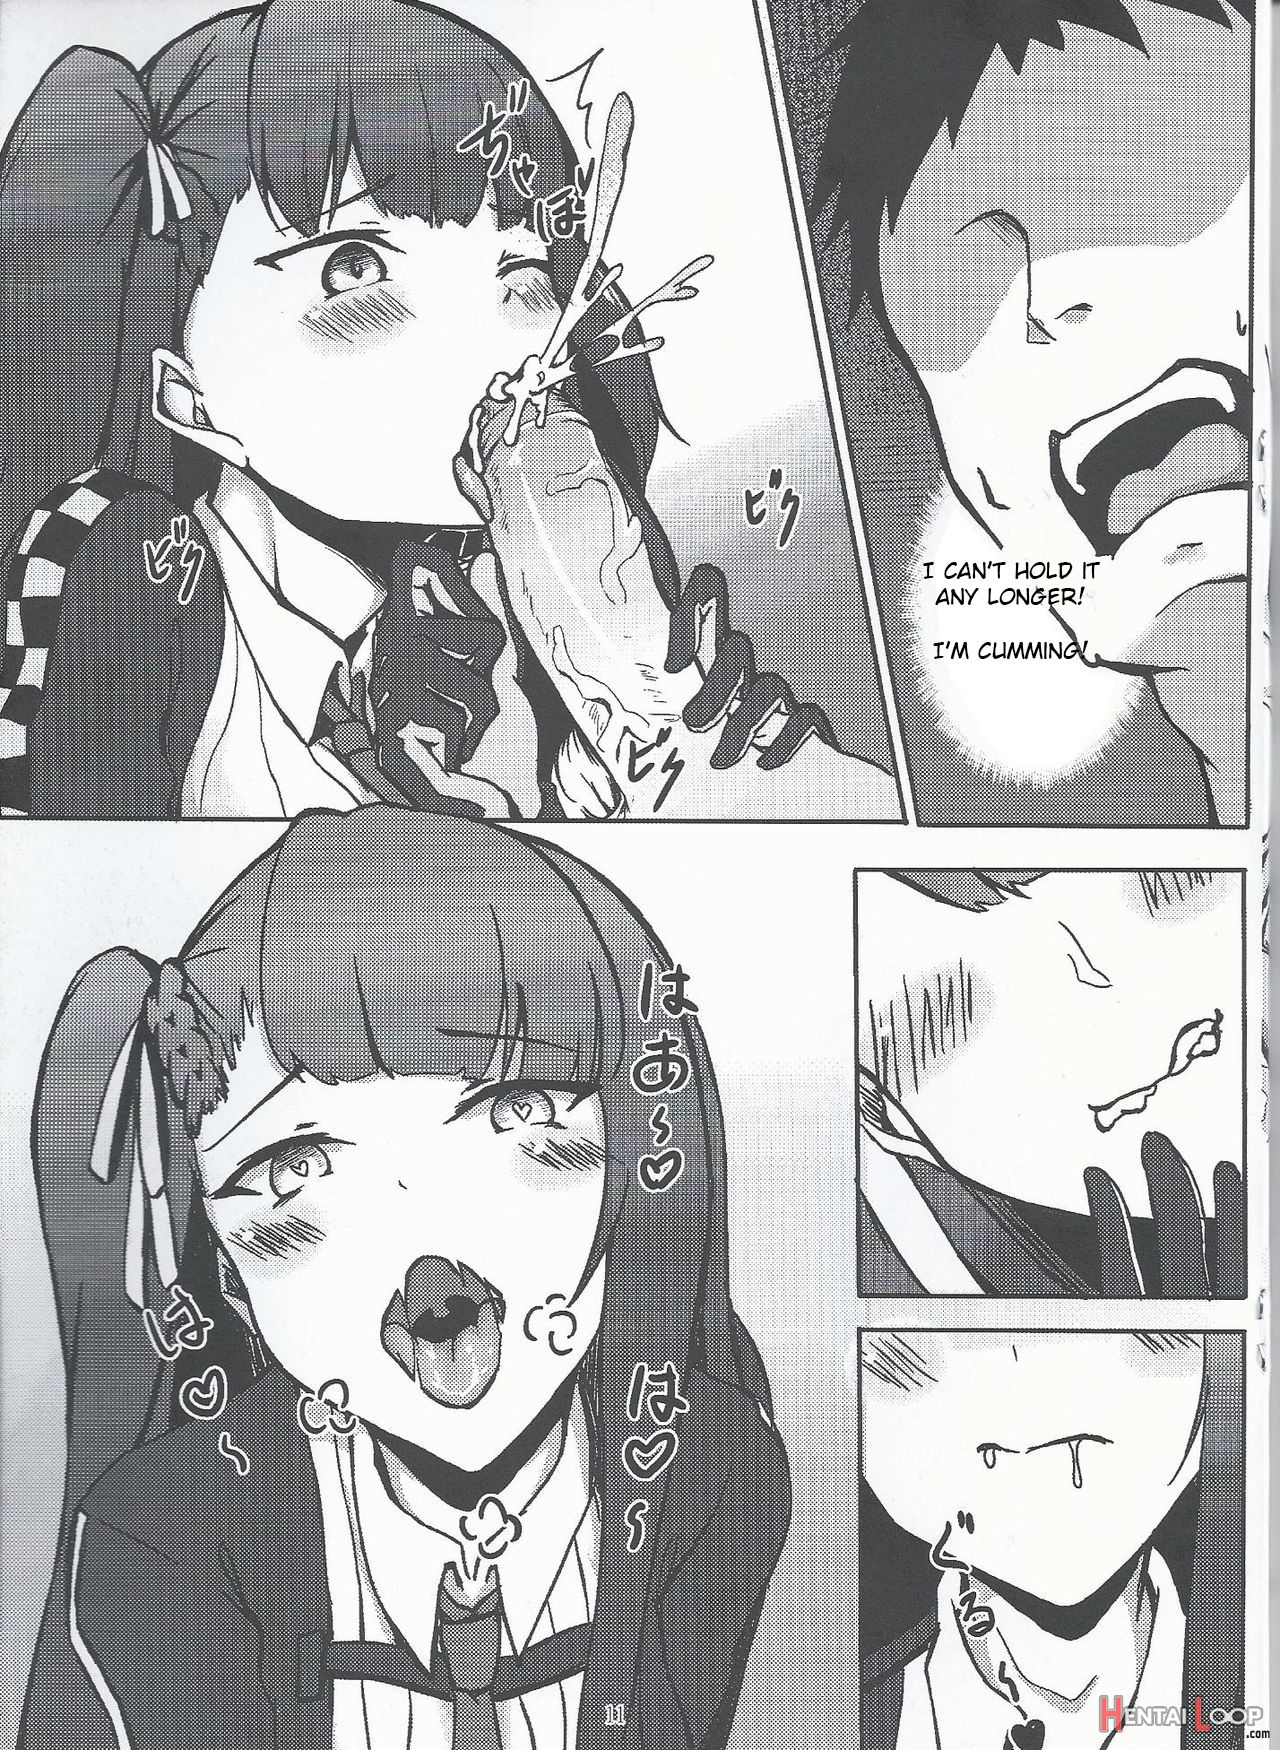 I Don't Know What To Title This Book, But Anyway It's About Wa2000 page 10